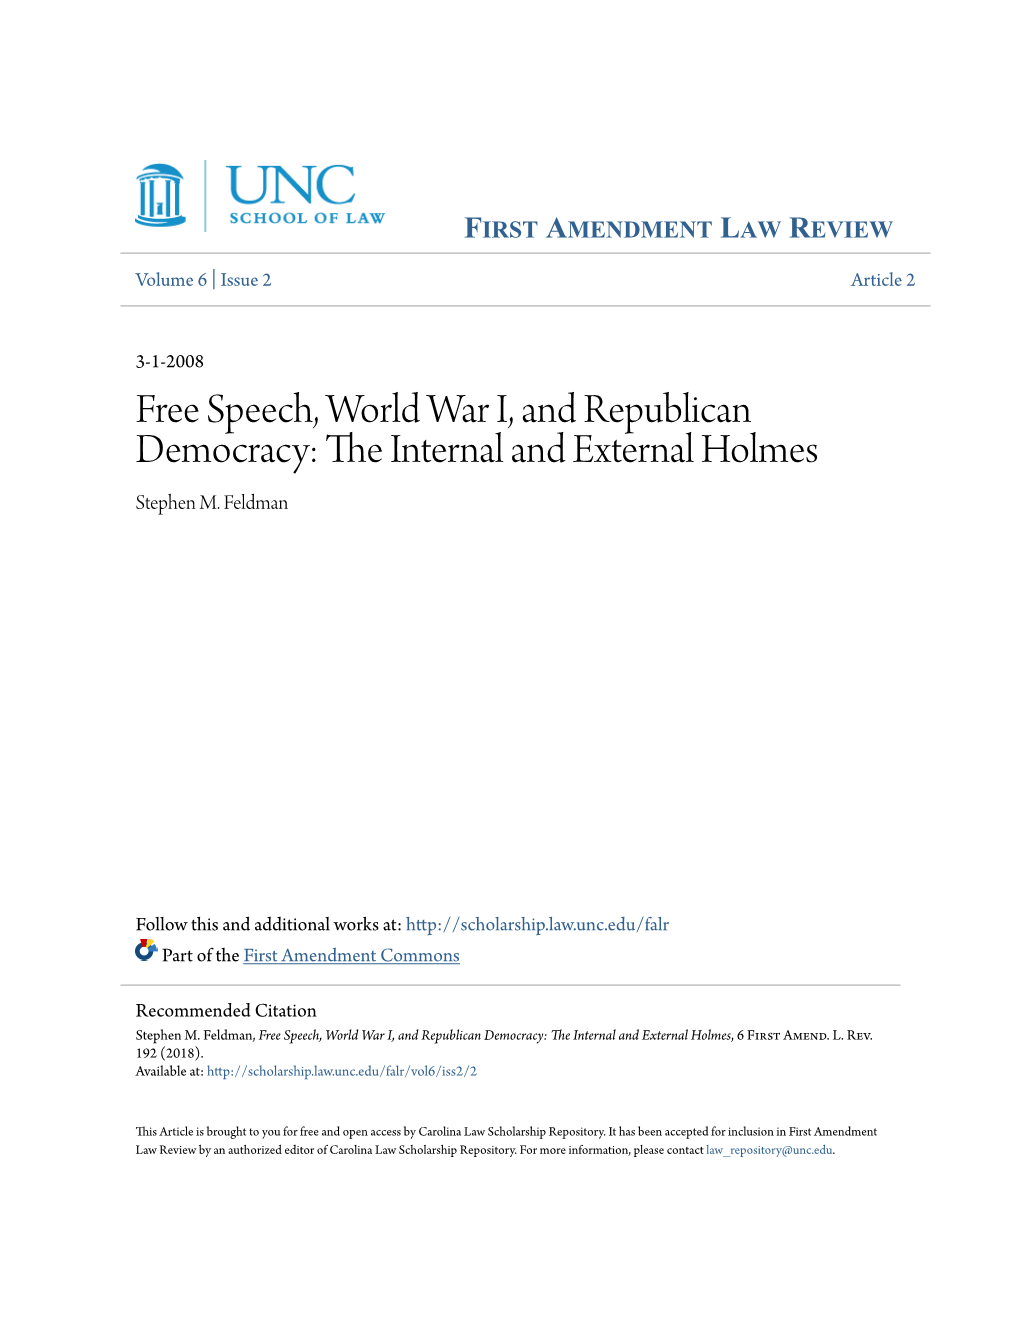 Free Speech, World War I, and Republican Democracy: the Ni Ternal and External Holmes Stephen M